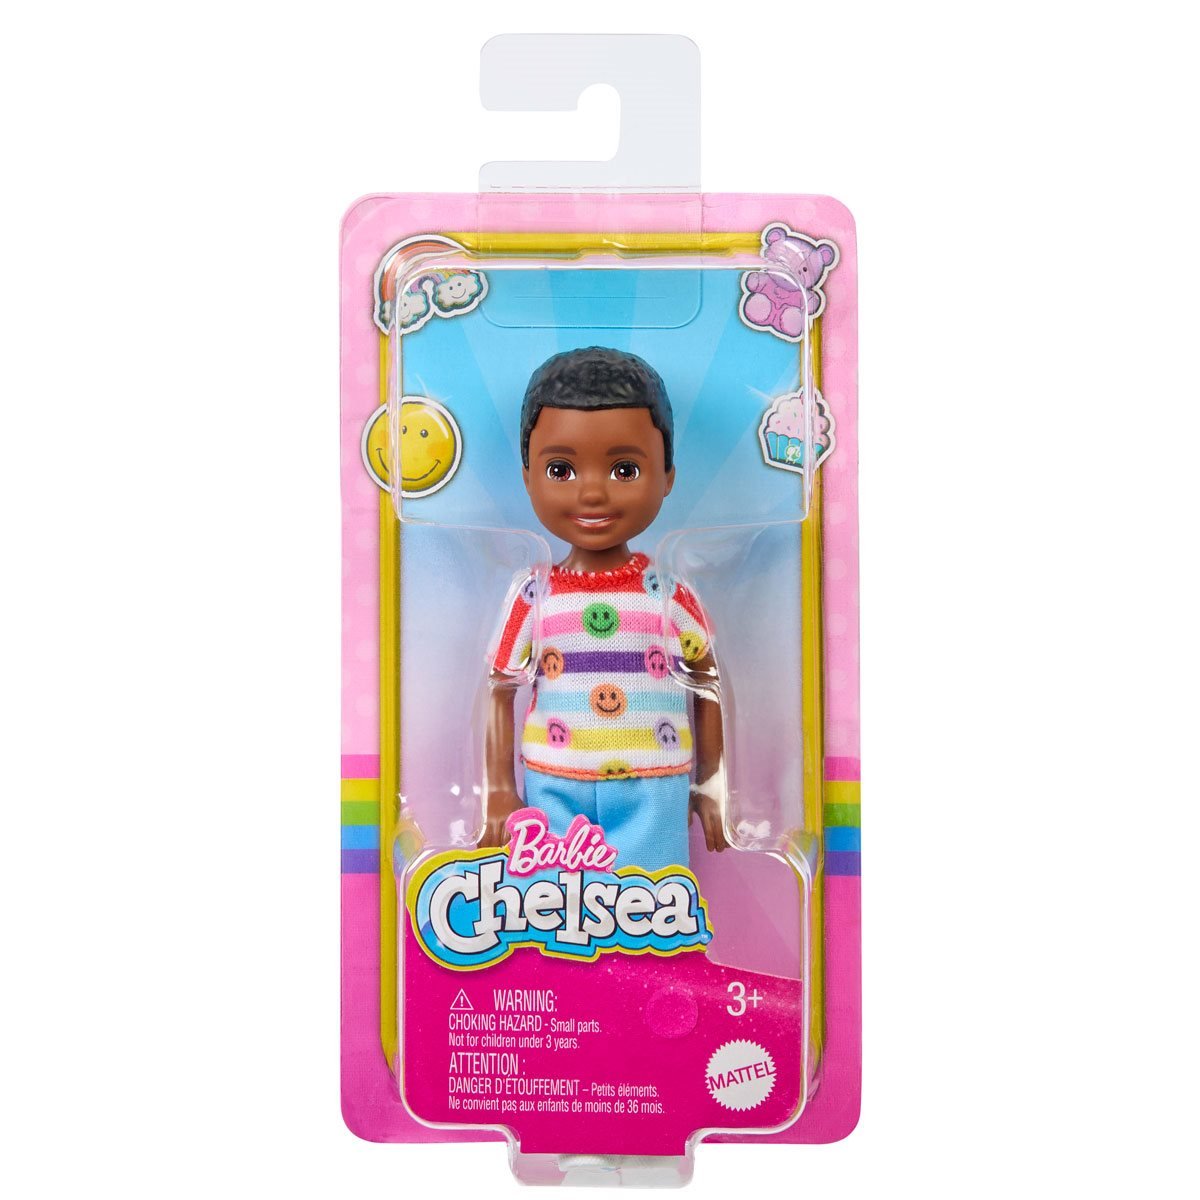 Barbie Chelsea Doll with Smiley Face Shirt